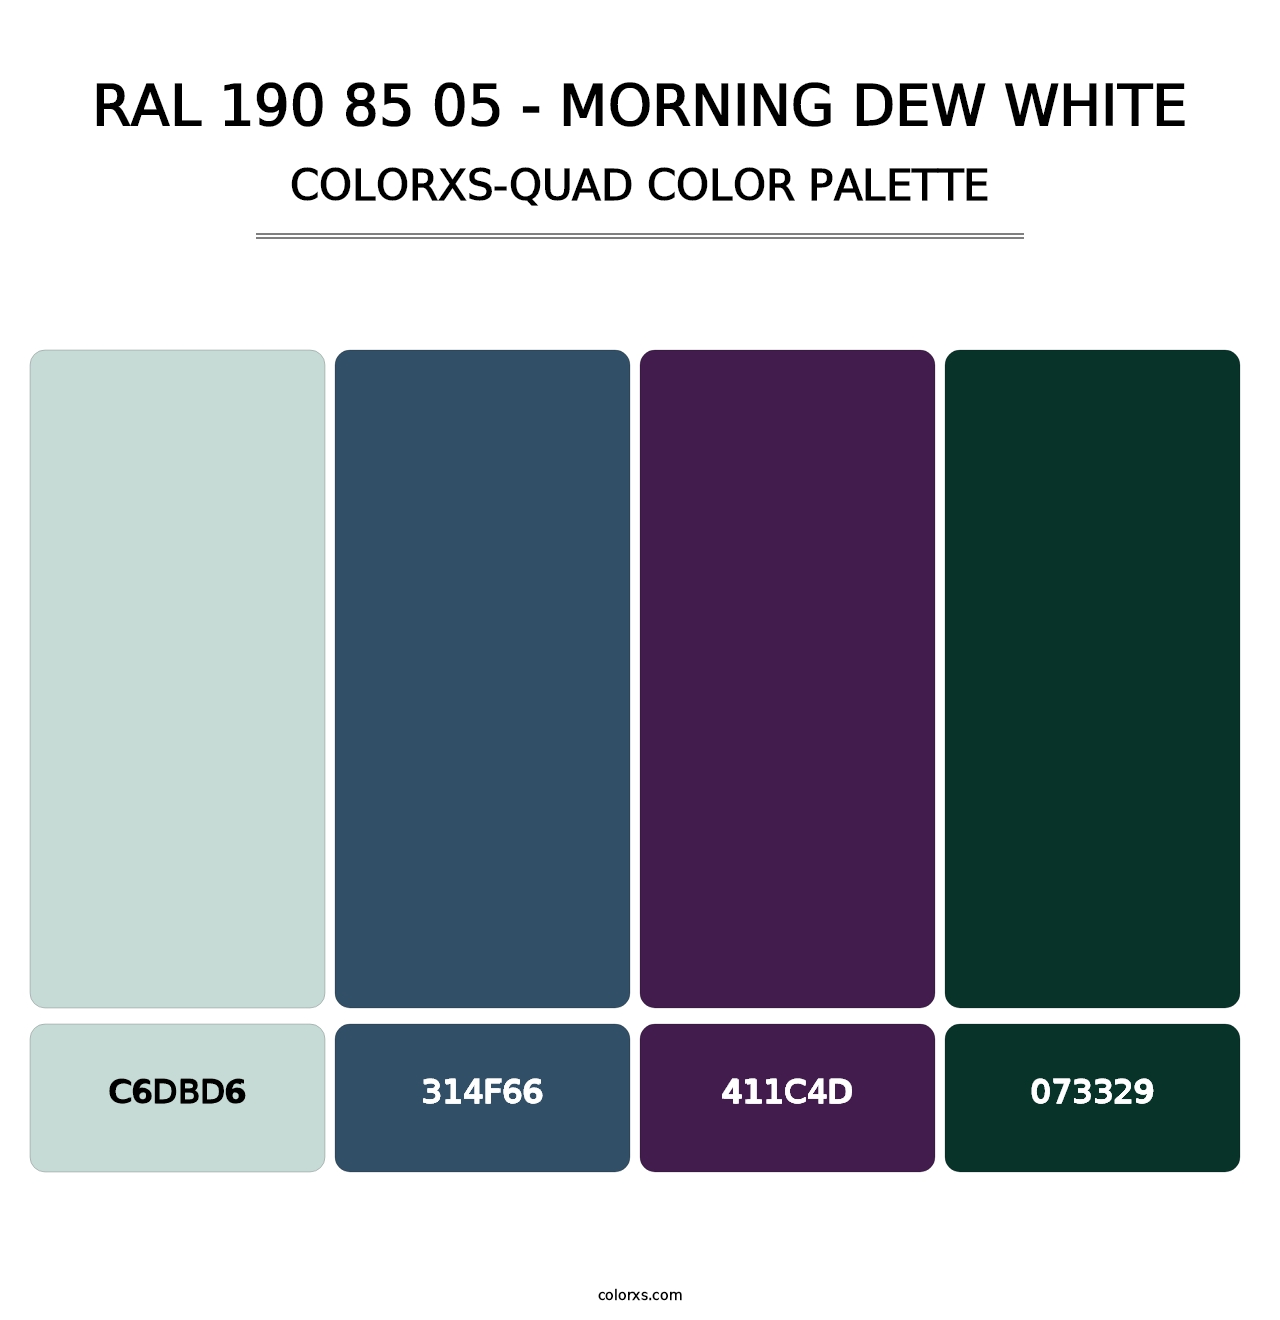 RAL 190 85 05 - Morning Dew White - Colorxs Quad Palette